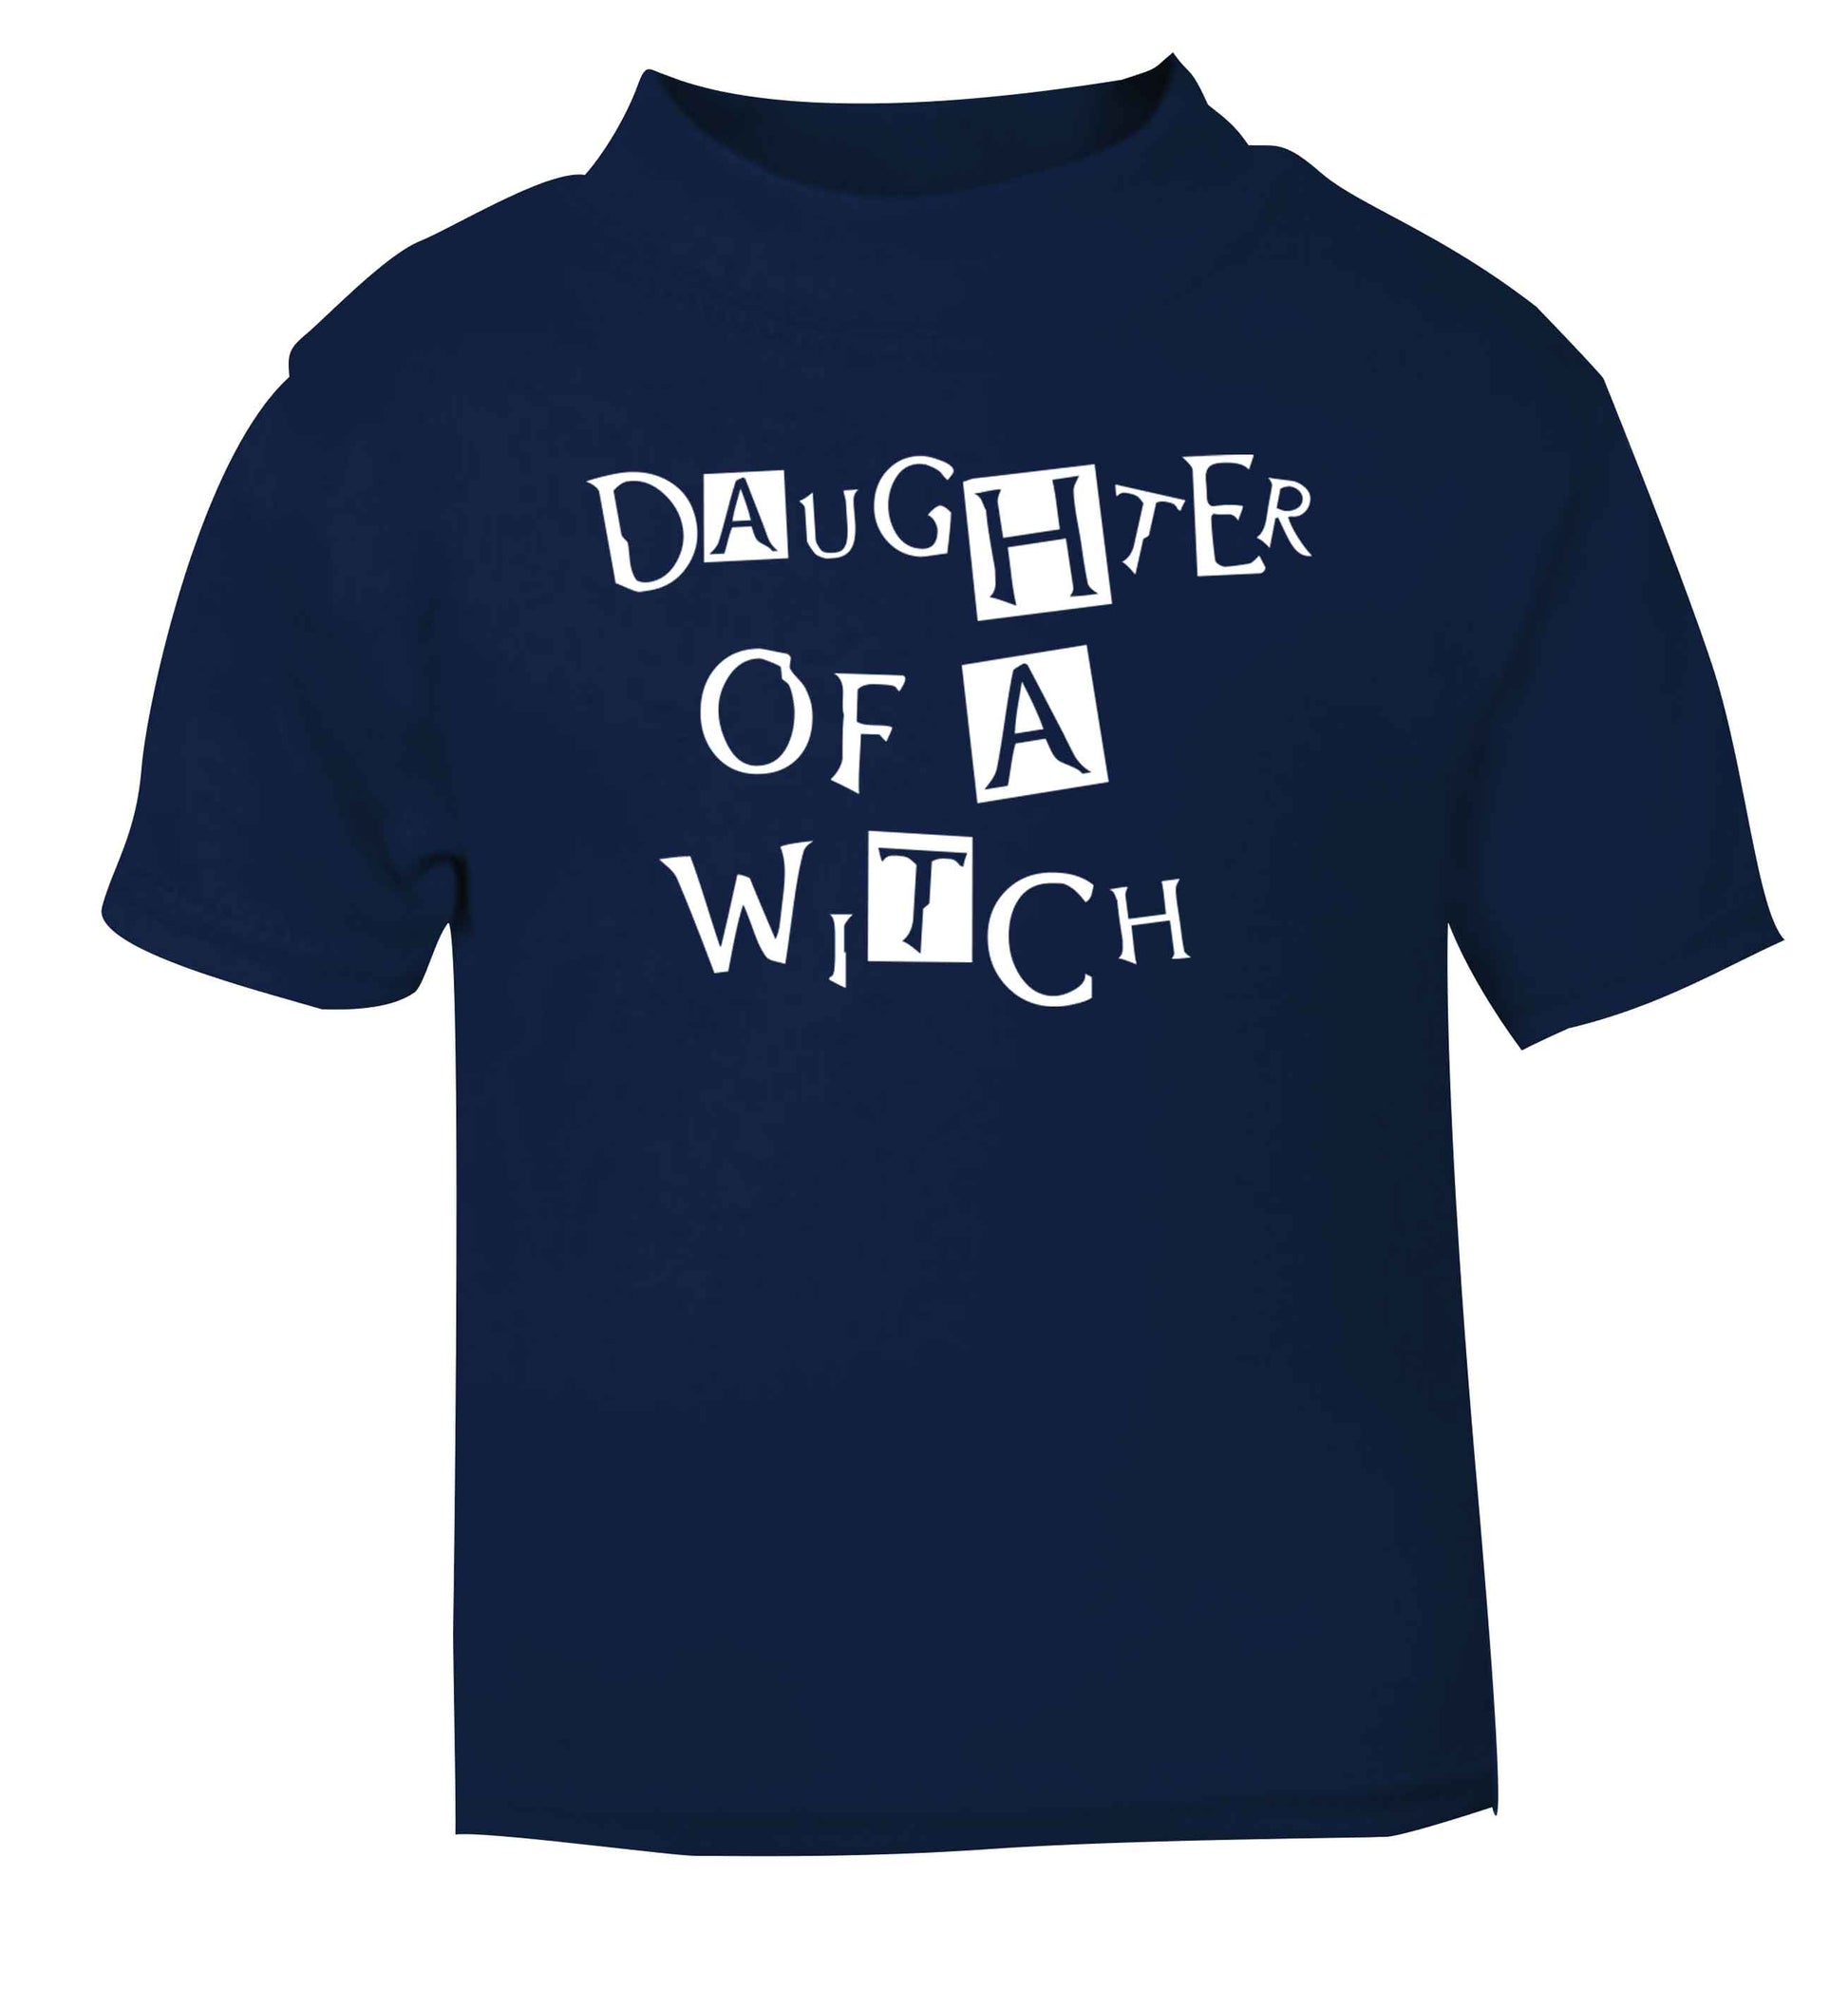 Daughter of a witch navy baby toddler Tshirt 2 Years